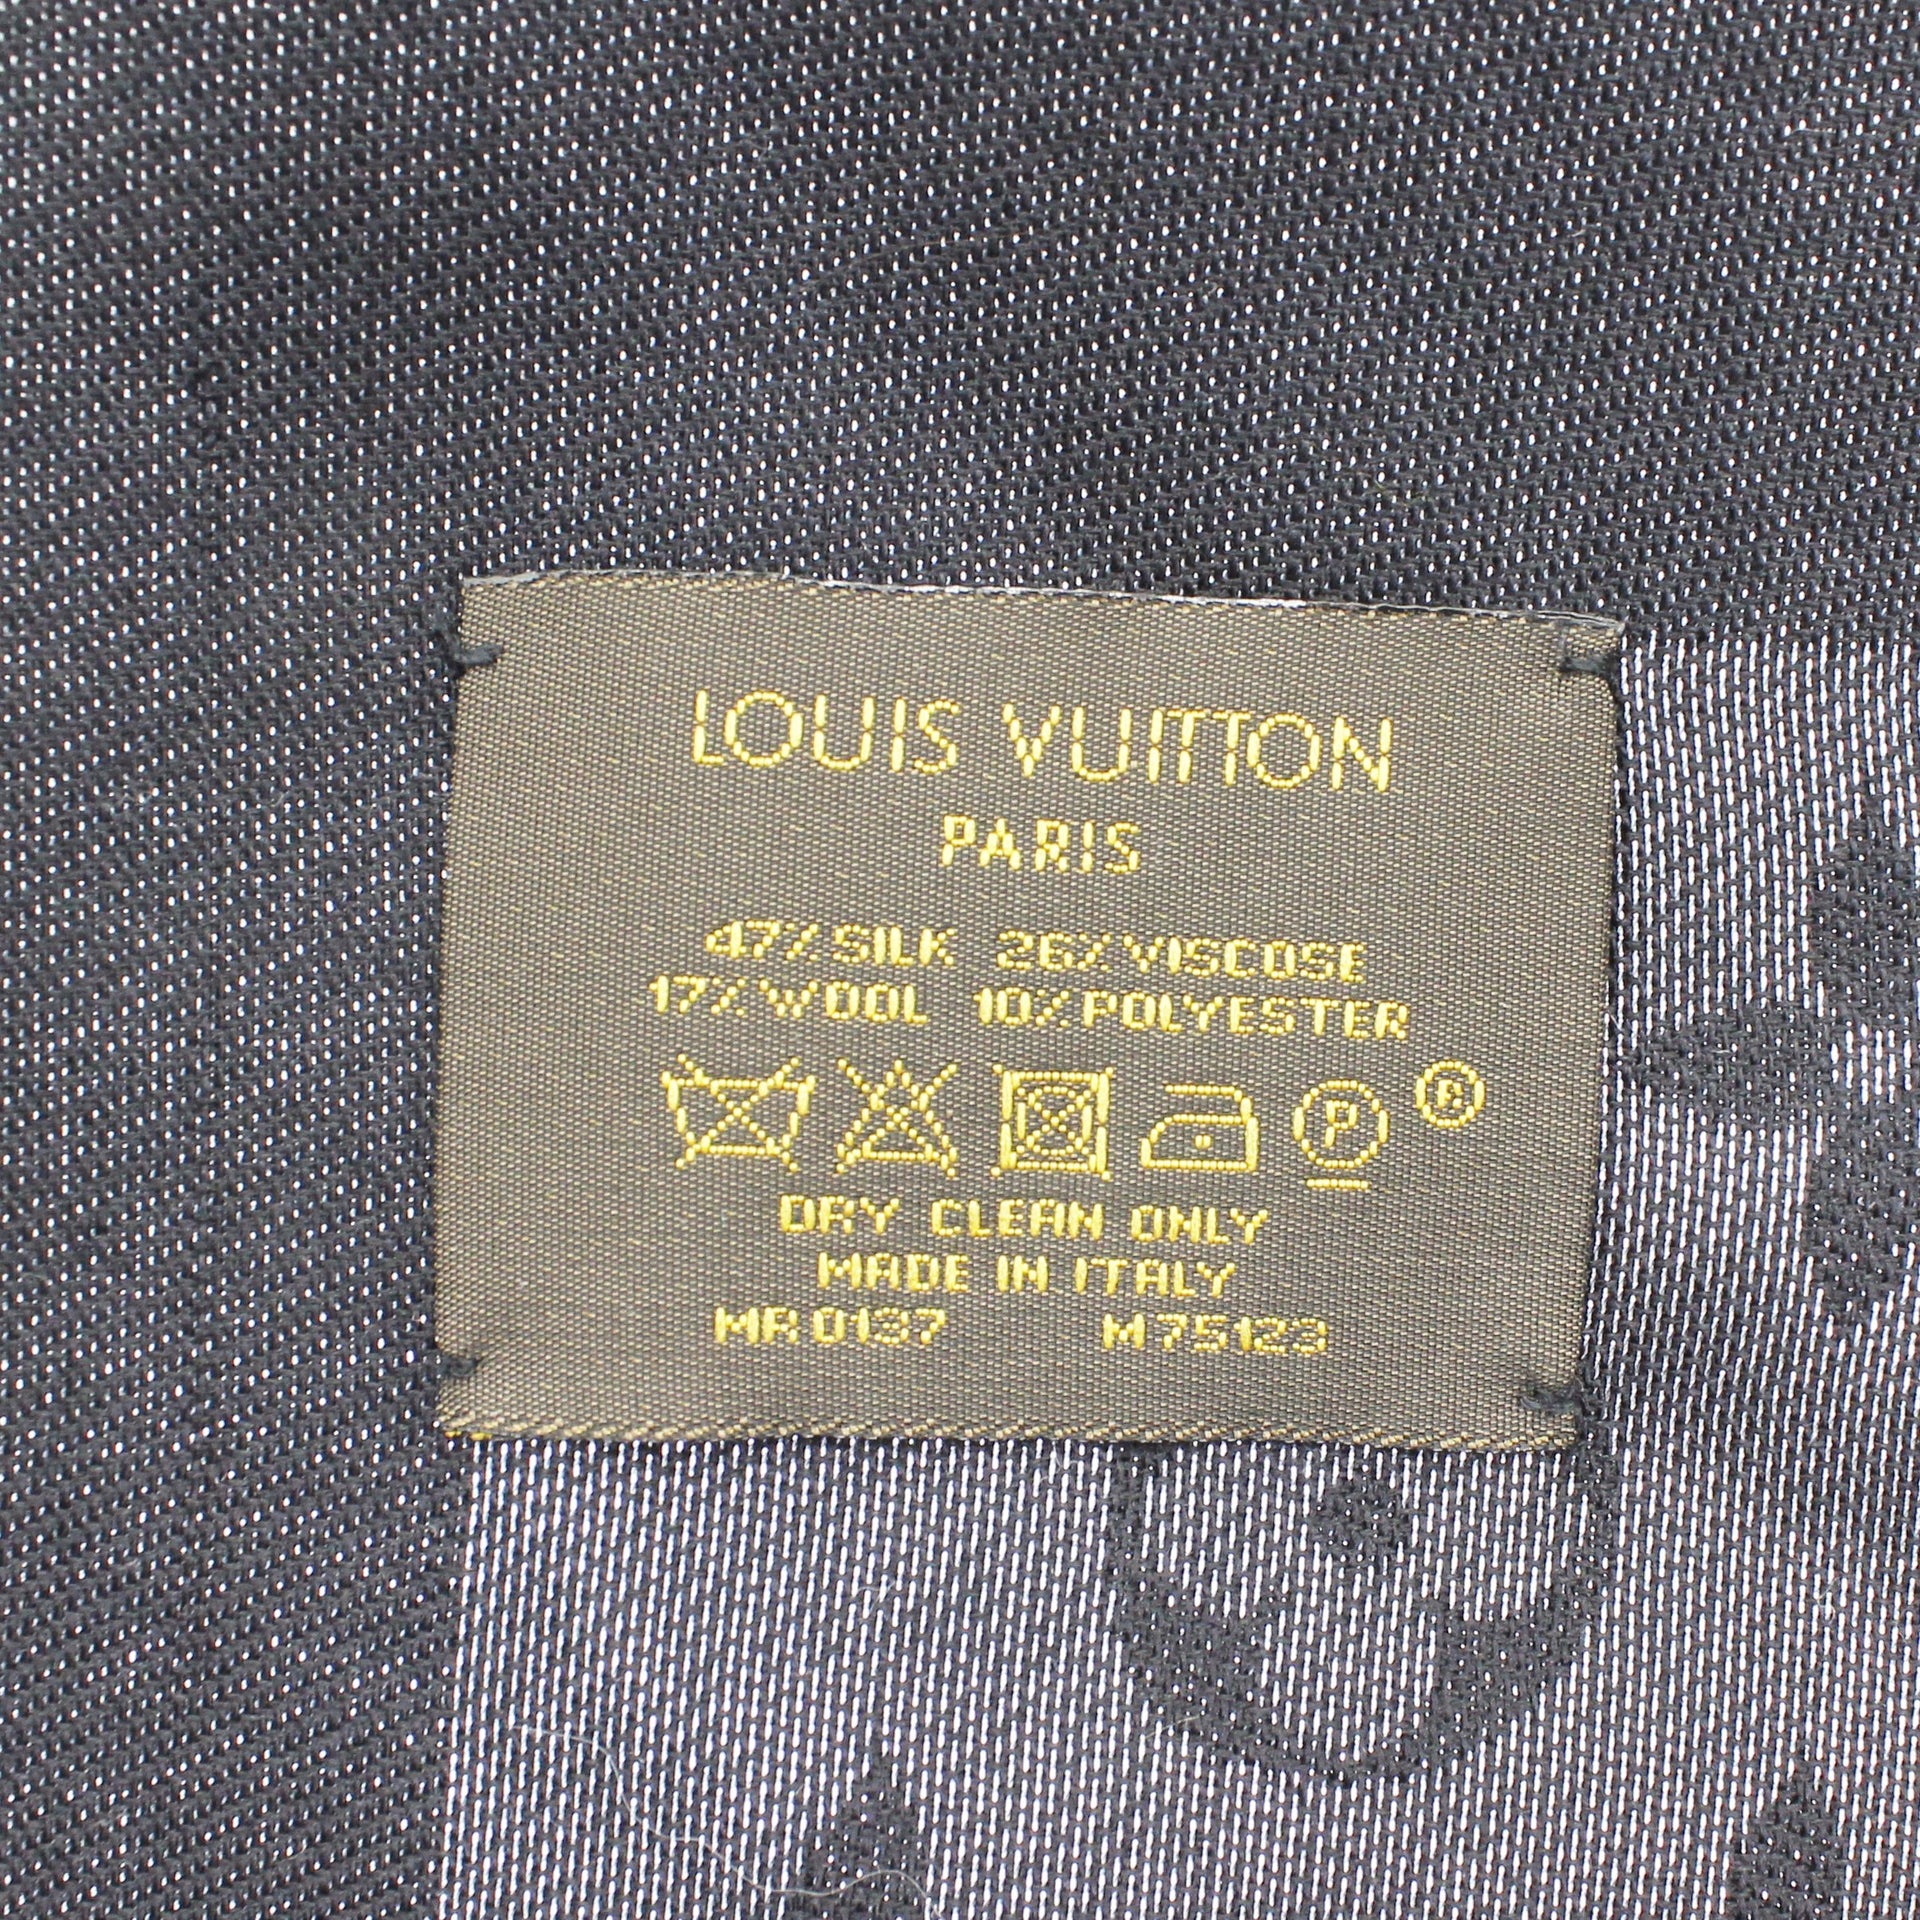 Louis Vuitton Shawl with Box : Swap or Buy